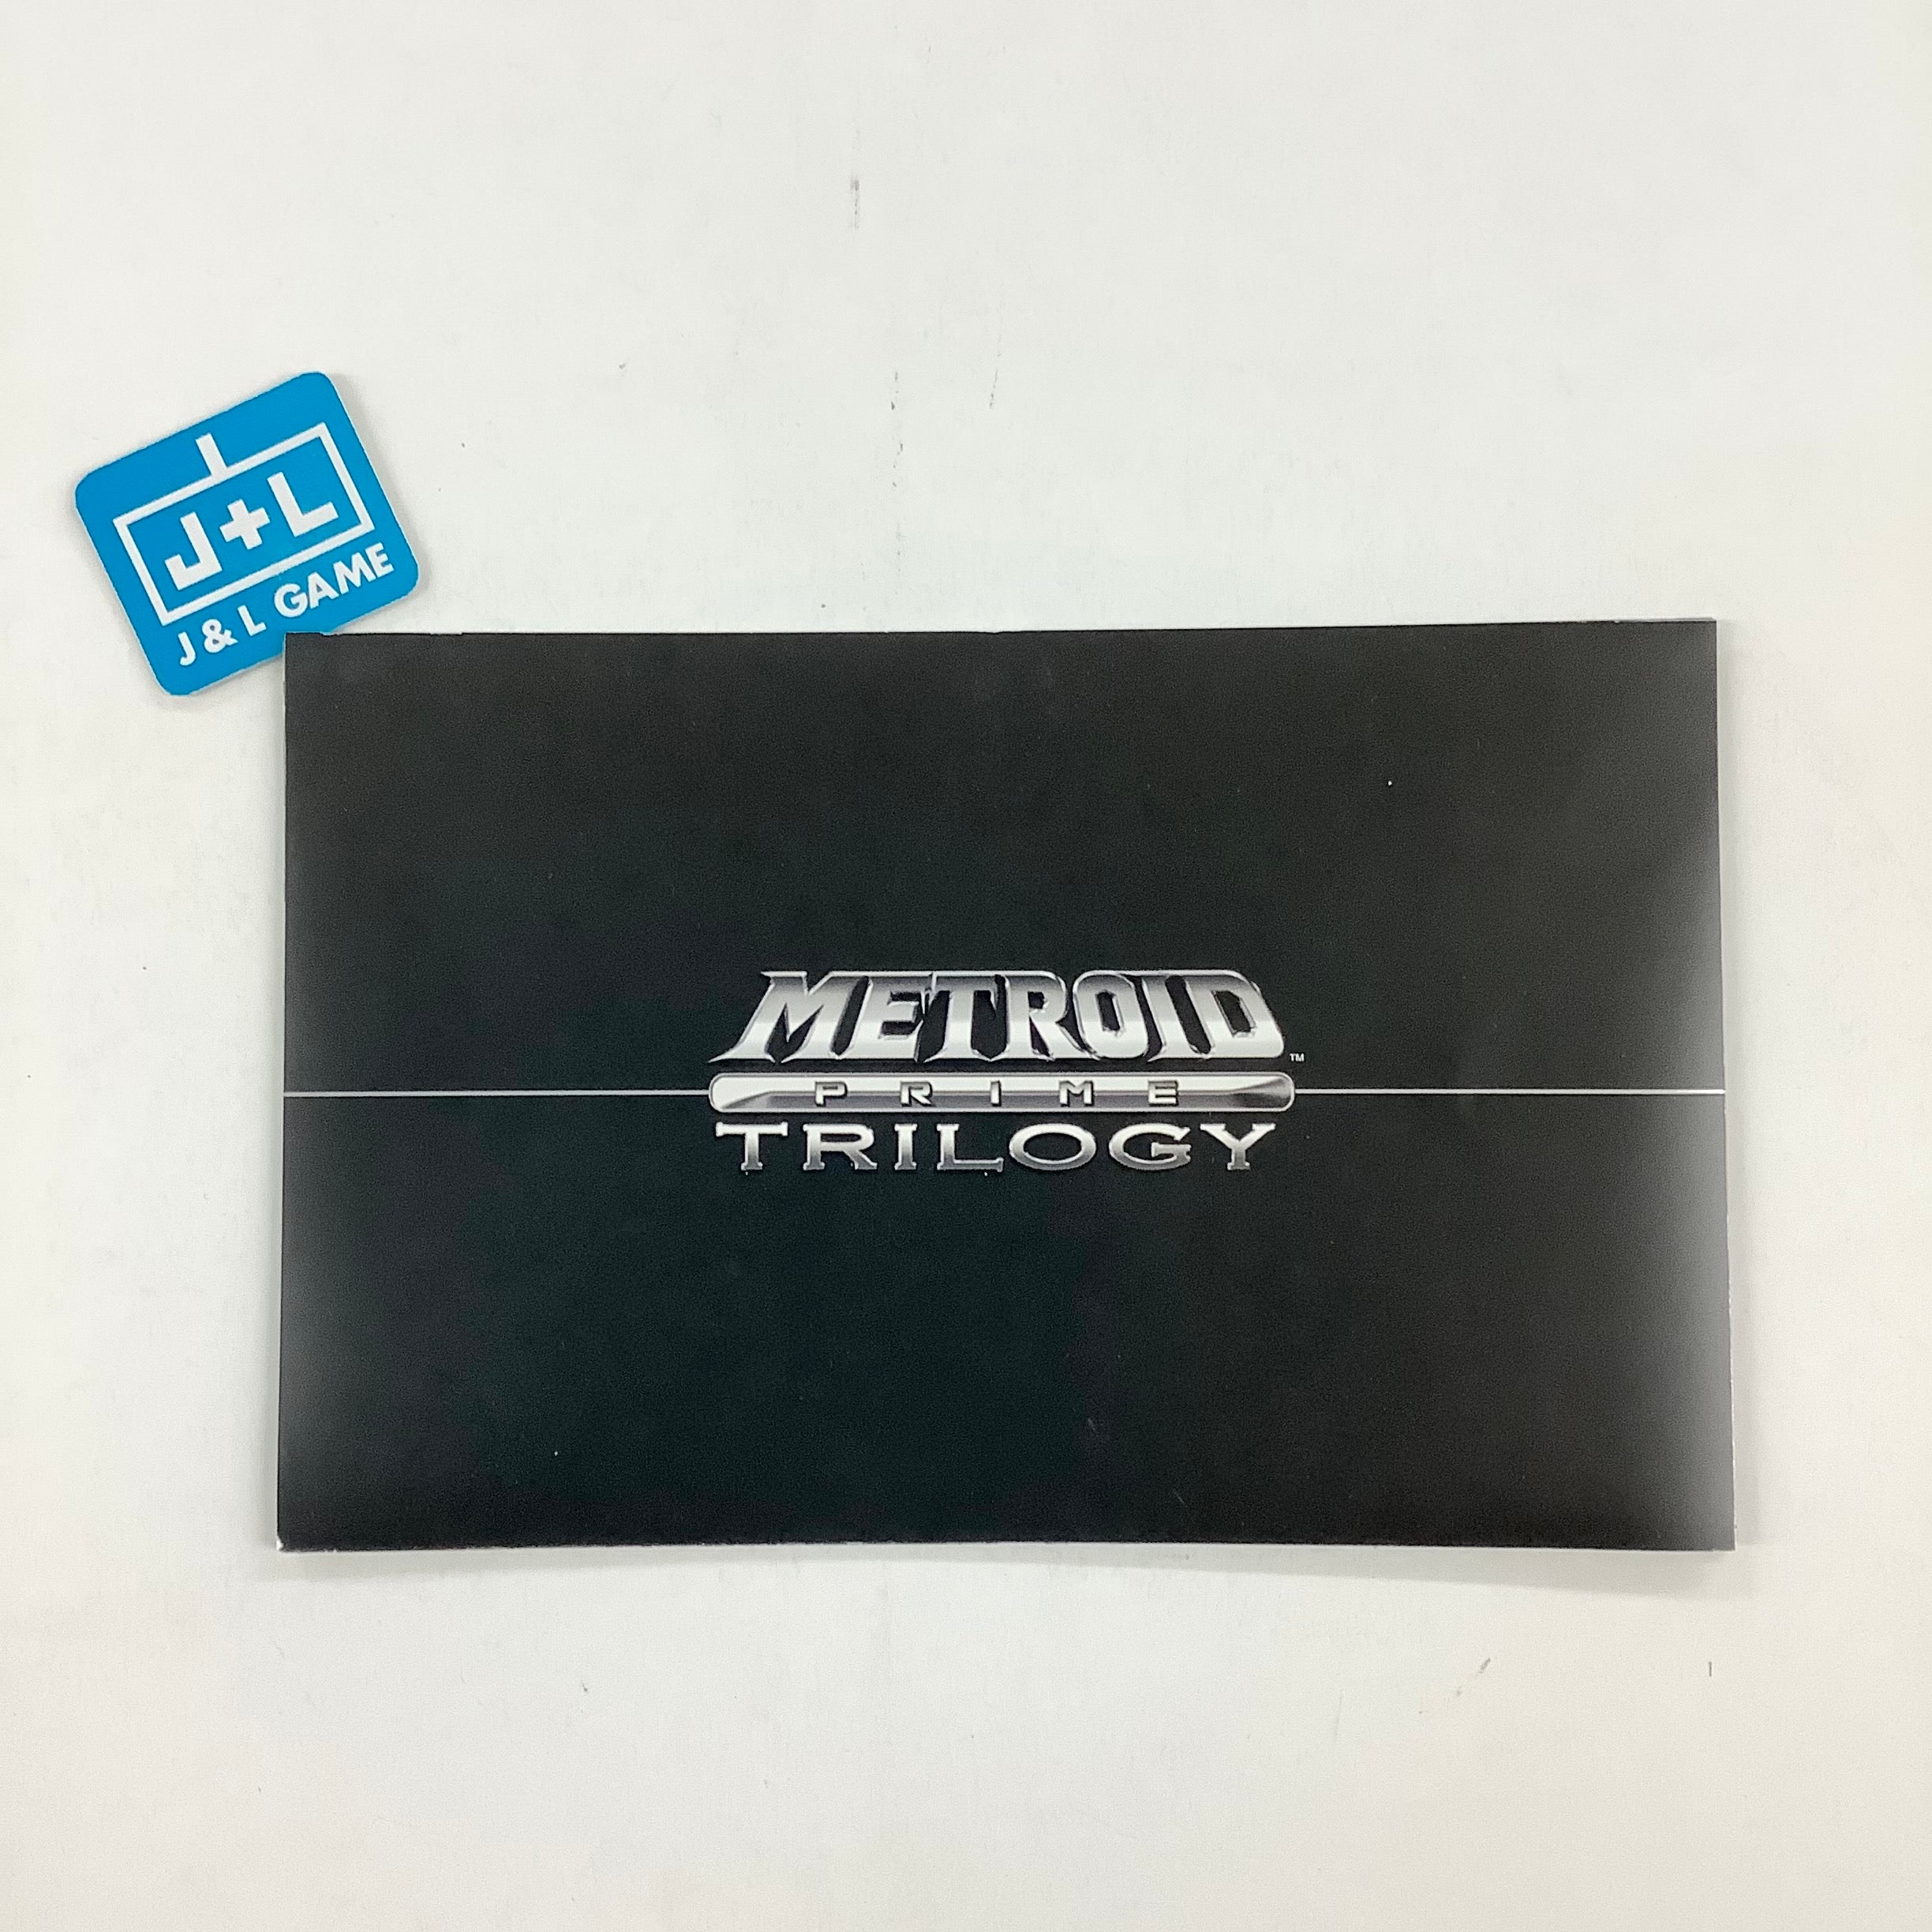 Metroid Prime Trilogy (Collector's Edition) - Nintendo Wii [Pre-Owned] Video Games Nintendo   